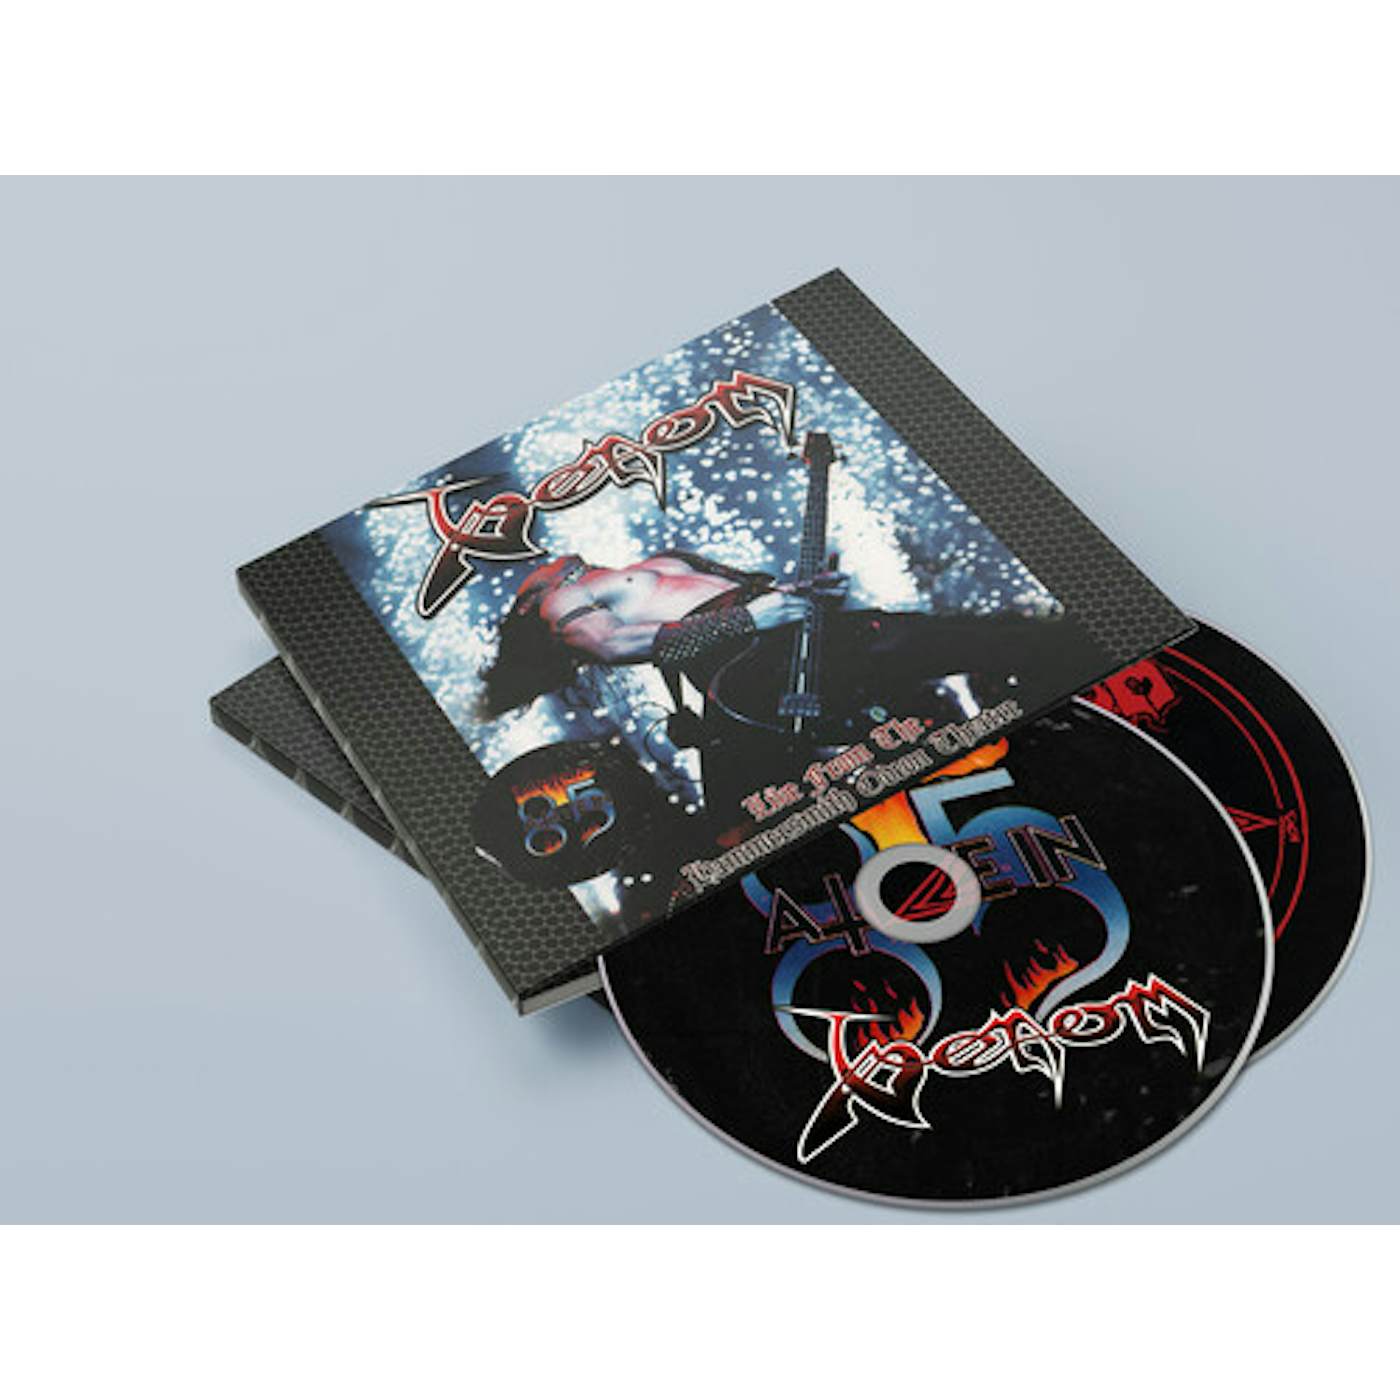 Venom LIVE FROM THE HAMMERSMITH ODEON CD